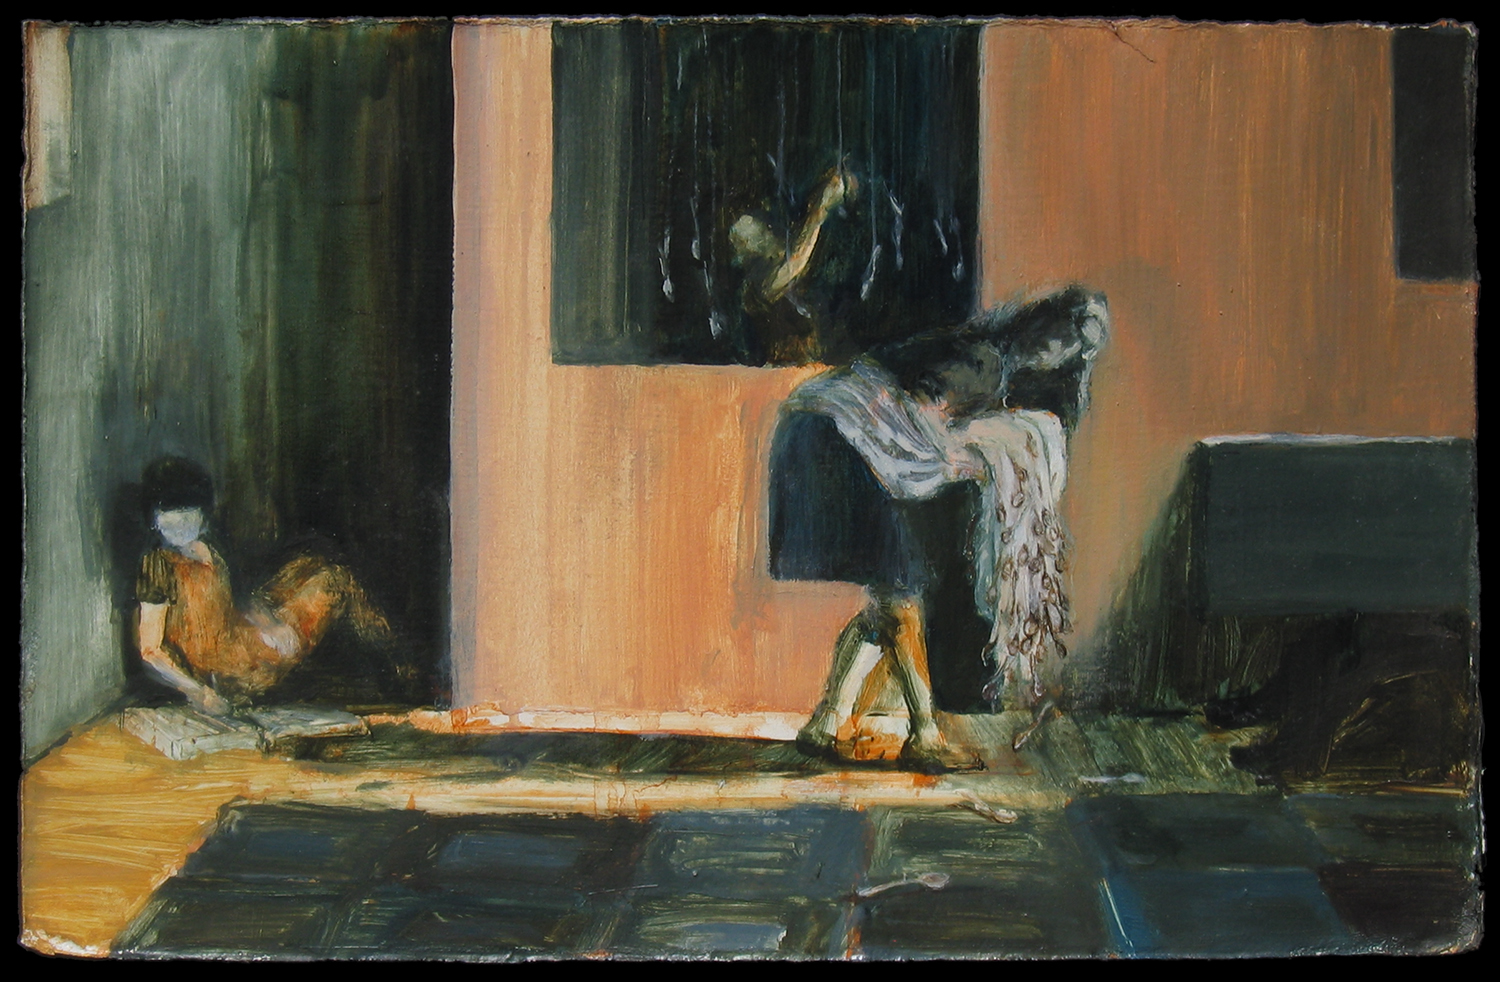   The wings hadbecome heavier , 2006, oil on paper, 11.5 x 18 in. 